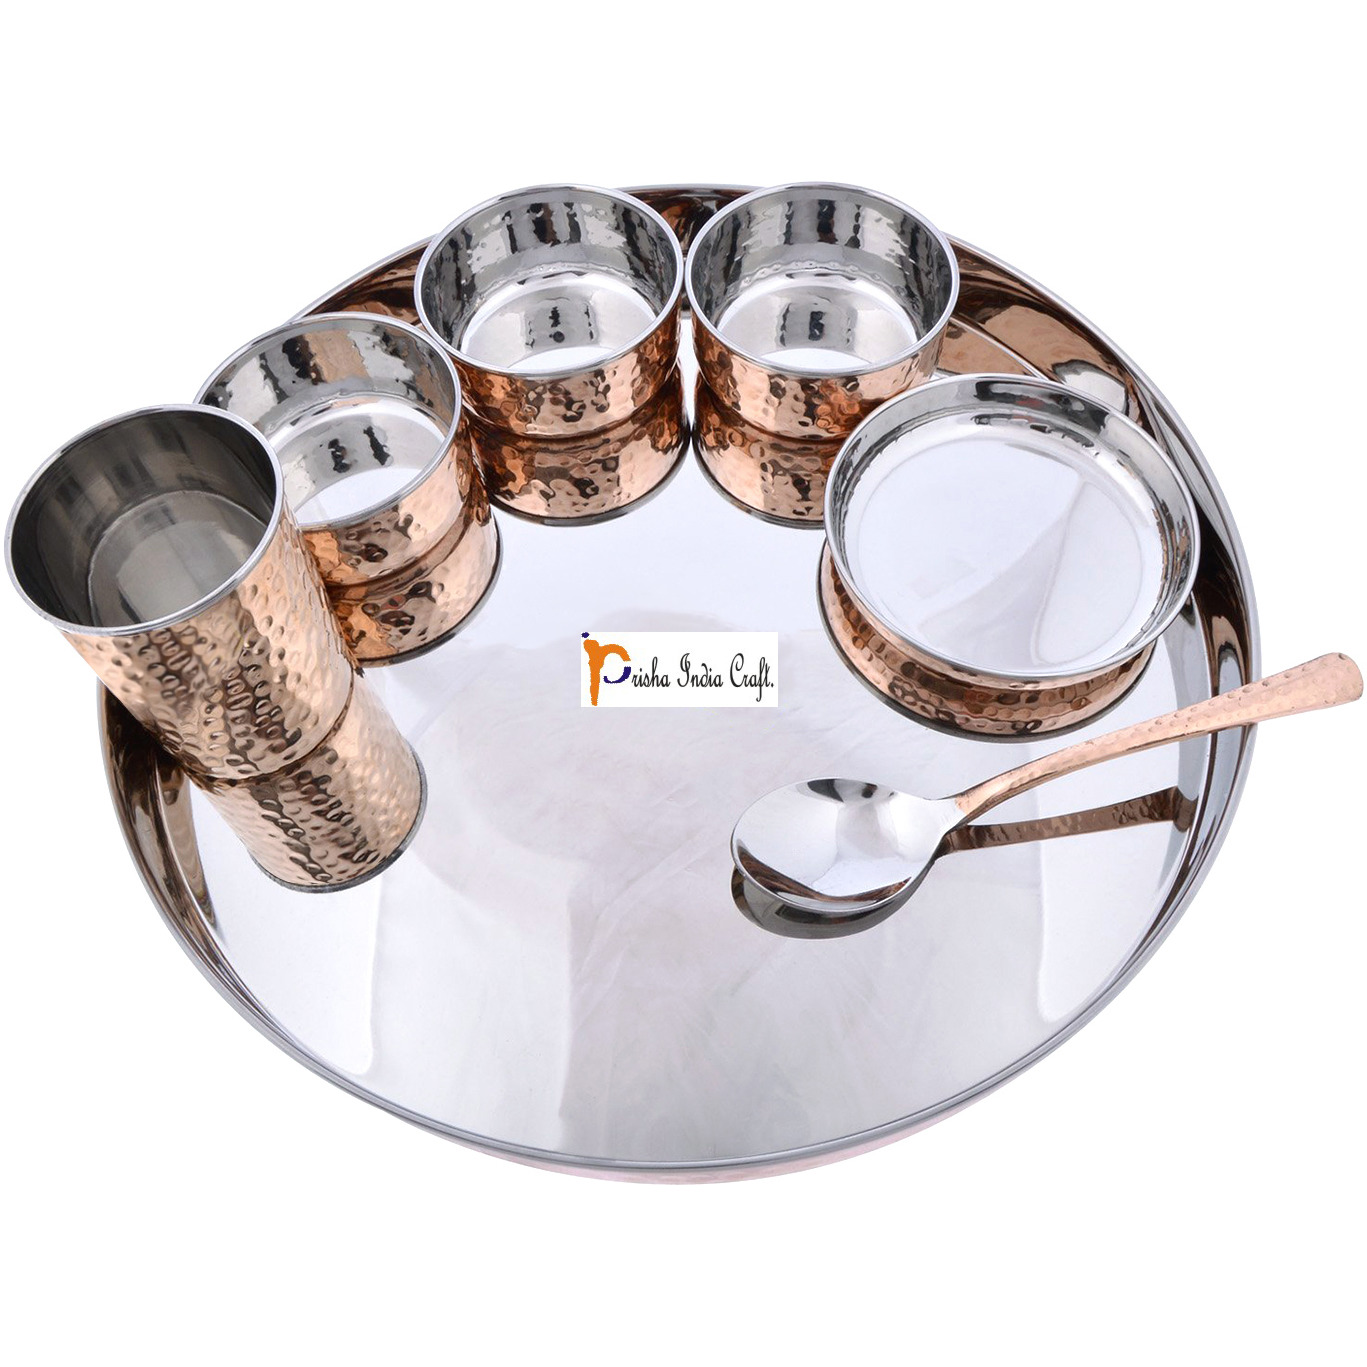 Prisha India Craft B. Set of 4 Dinnerware Traditional Stainless Steel Copper Dinner Set of Thali Plate, Bowls, Glass and Spoon, Dia 13  With 1 Pure Copper Classic Pitcher Jug - Christmas Gift